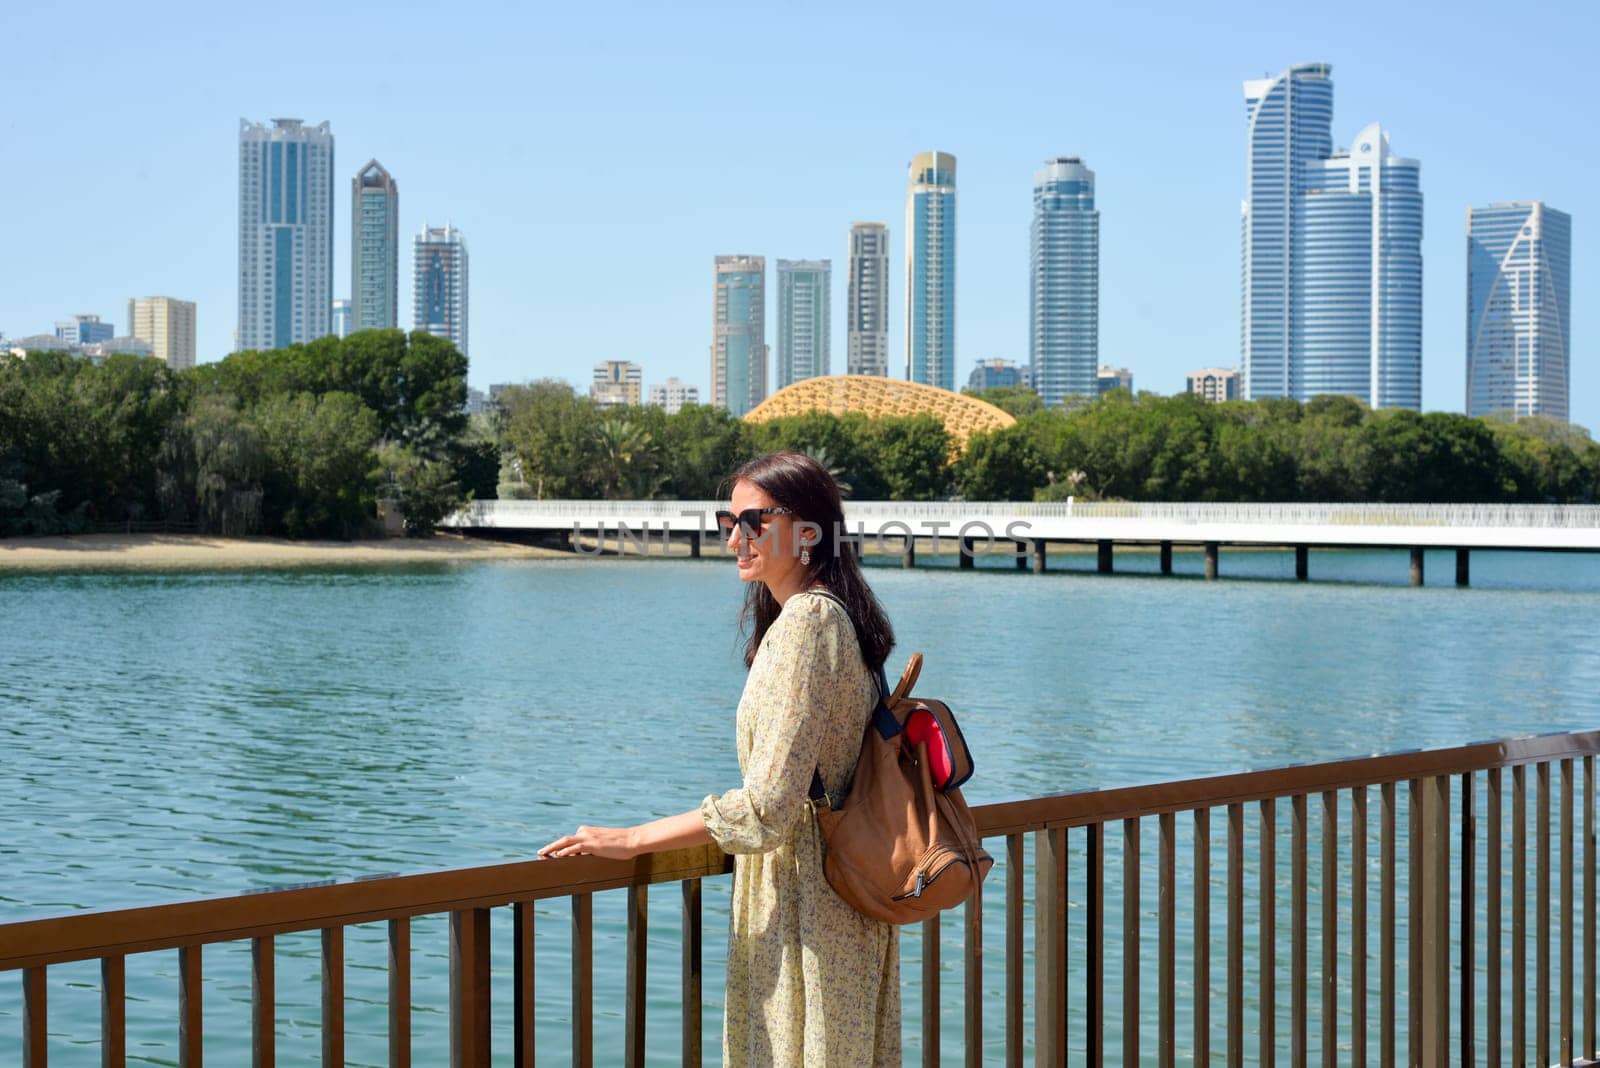 The skyline of Sharjah is visible from the waterfront - a woman tourist with a backpack enjoys the view of the water and skyscrapers. Cityscape of Sharjah UAE. by Ekaterina34